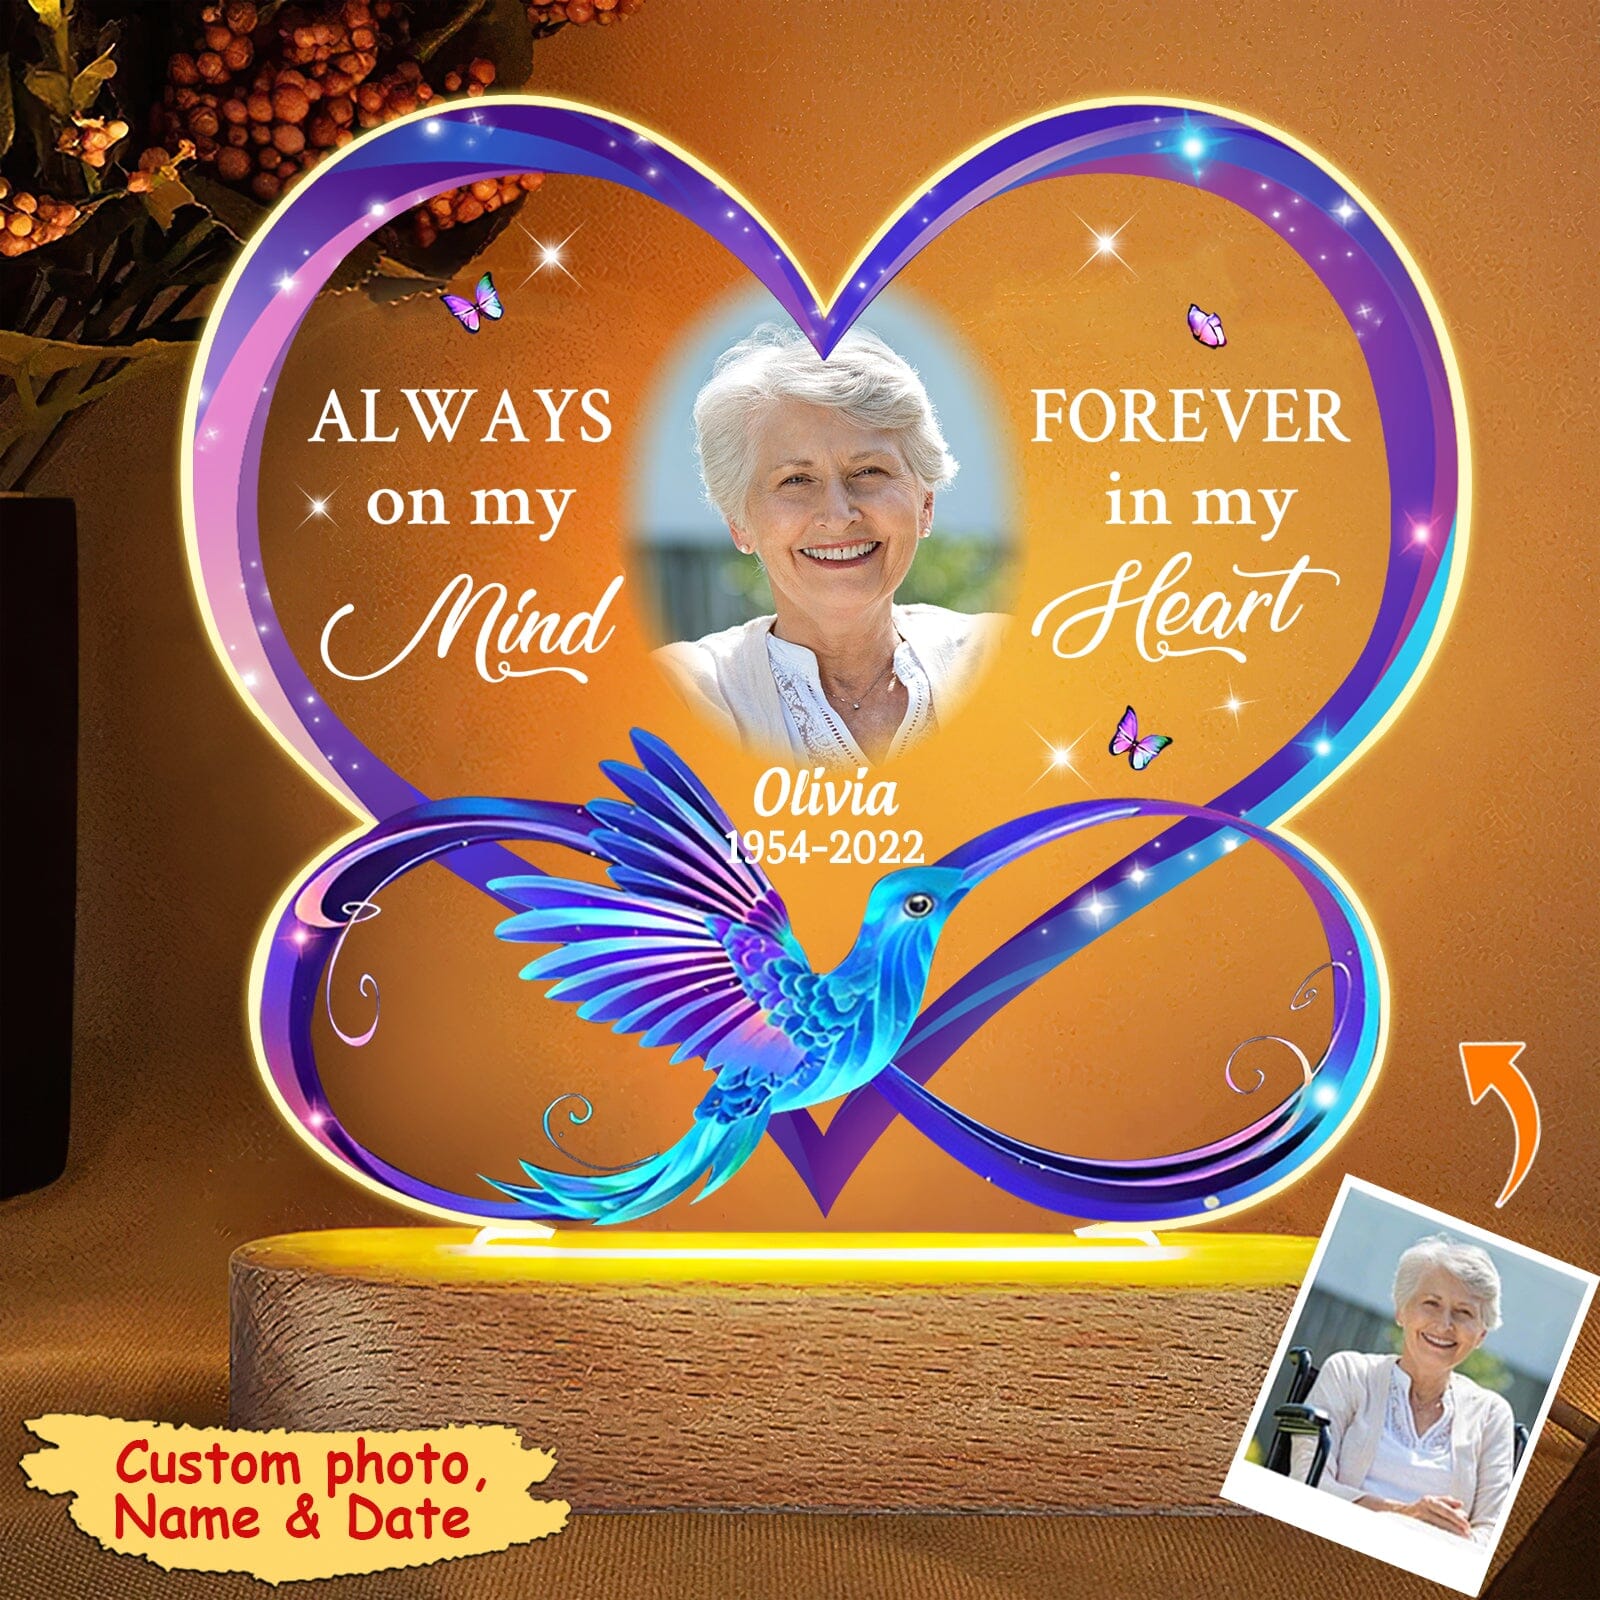 Always on my mind Forever in my heart - Personalized memorial Acrylic plaque LED lamp night light